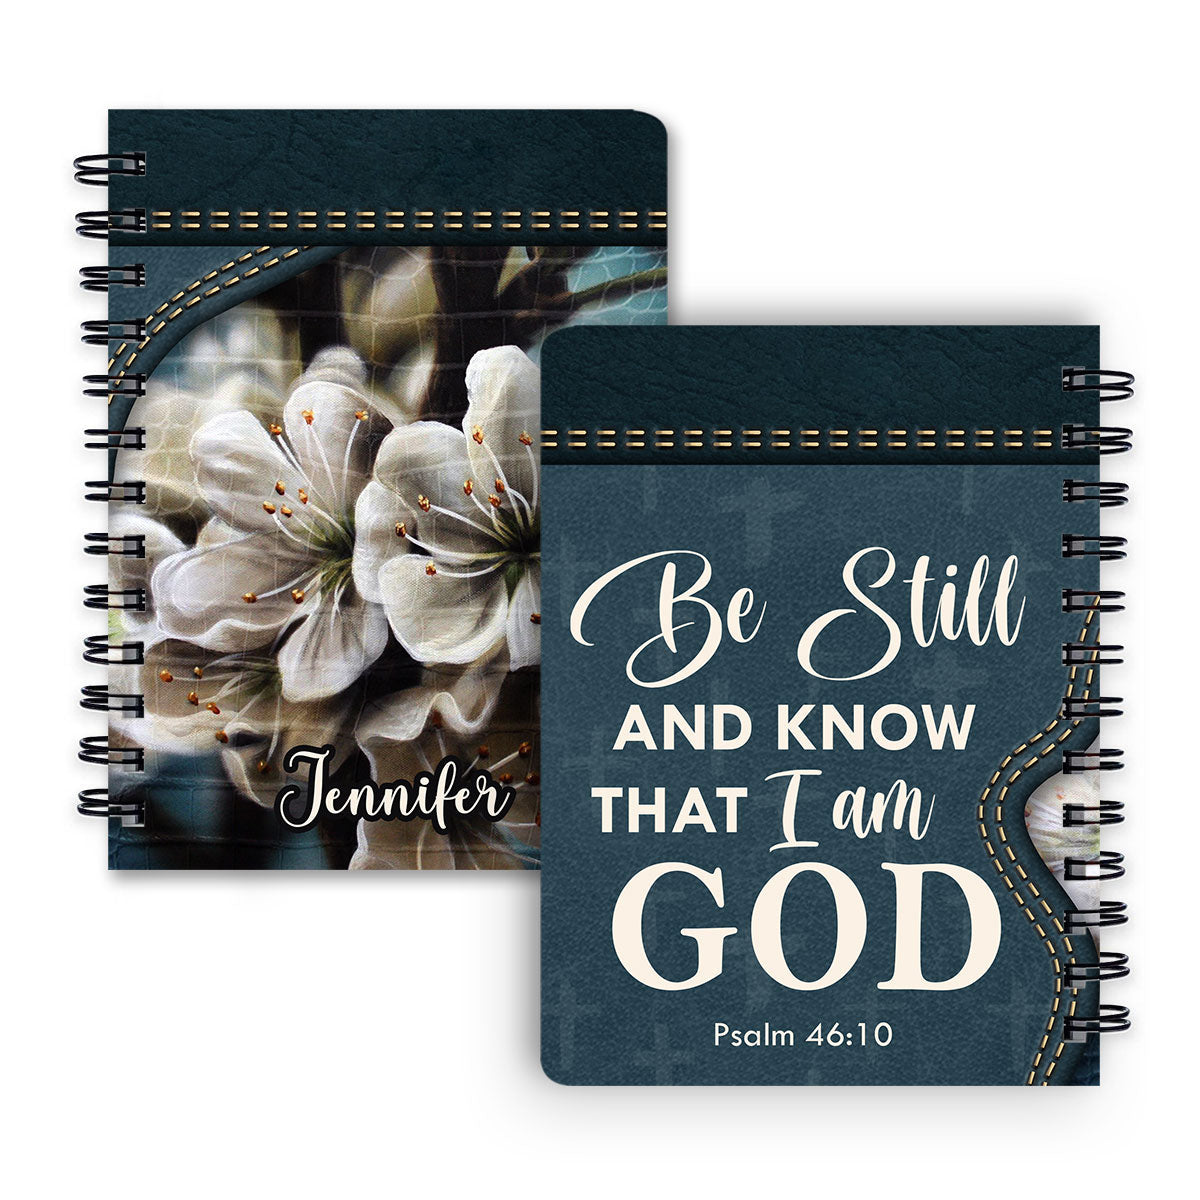 Be Still And Know That I Am God Personalized Floral Cross Spiral Notebook, Christian Spiritual Gifts For Friends